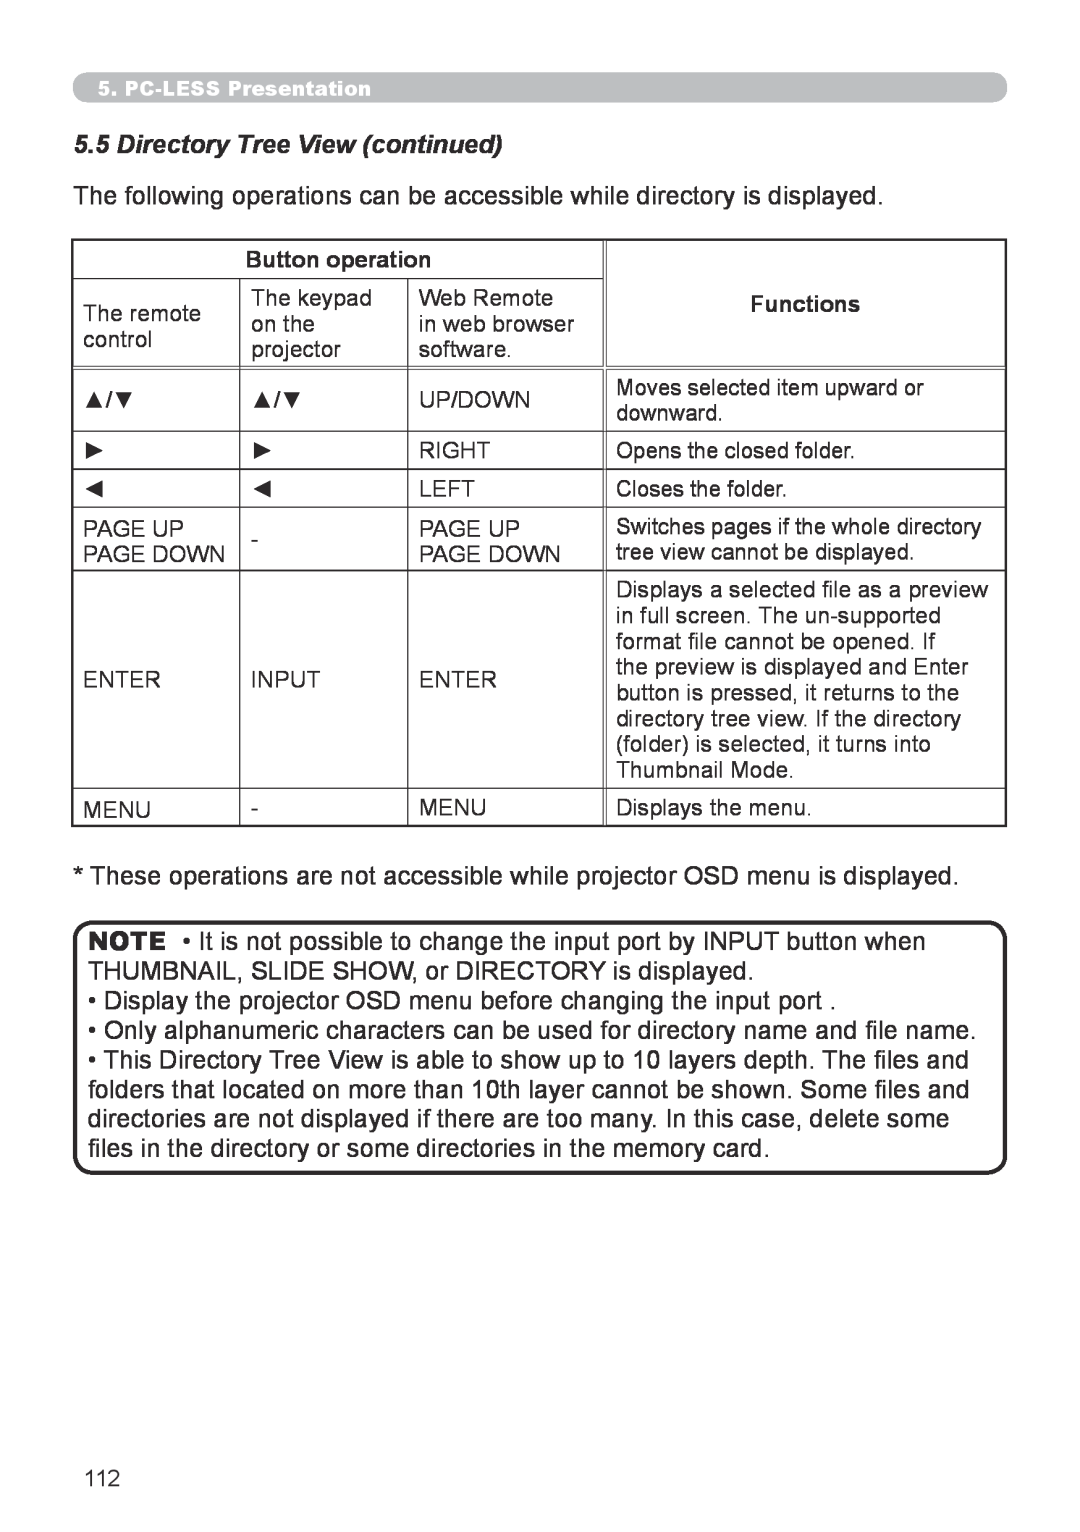 Hitachi CP-X267 user manual 5.5Directory Tree View continued 